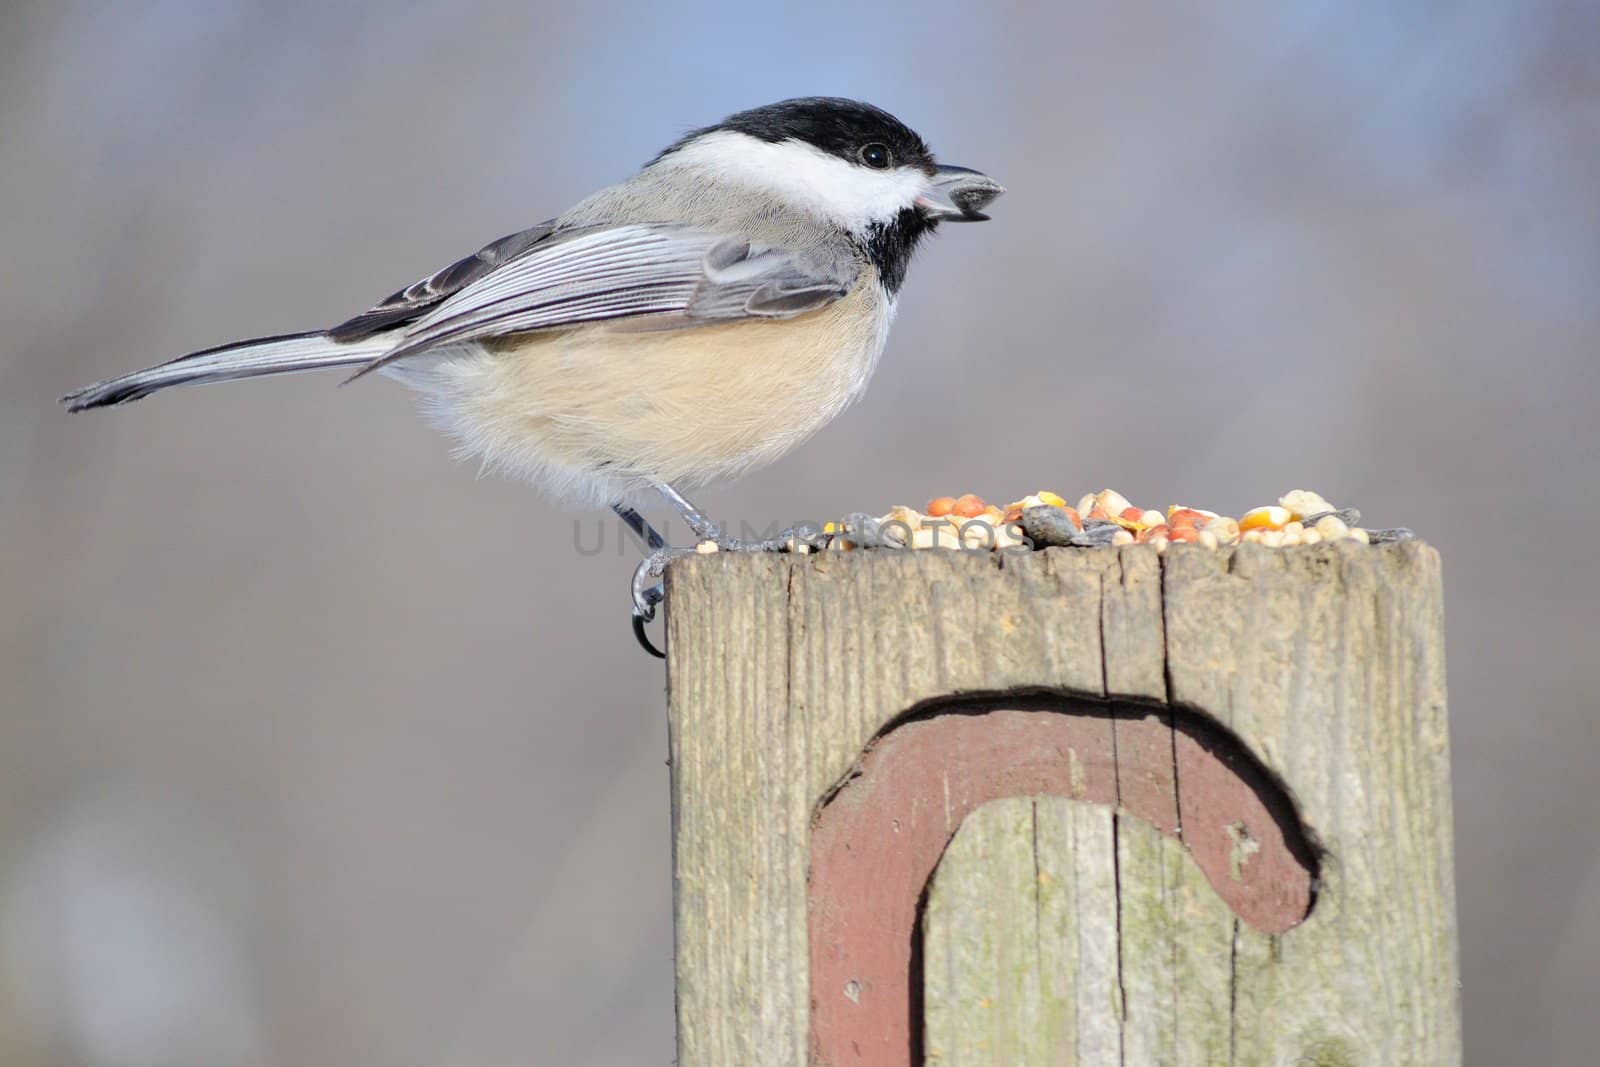 A black-capped chickadee perched on a post eating bird seed.